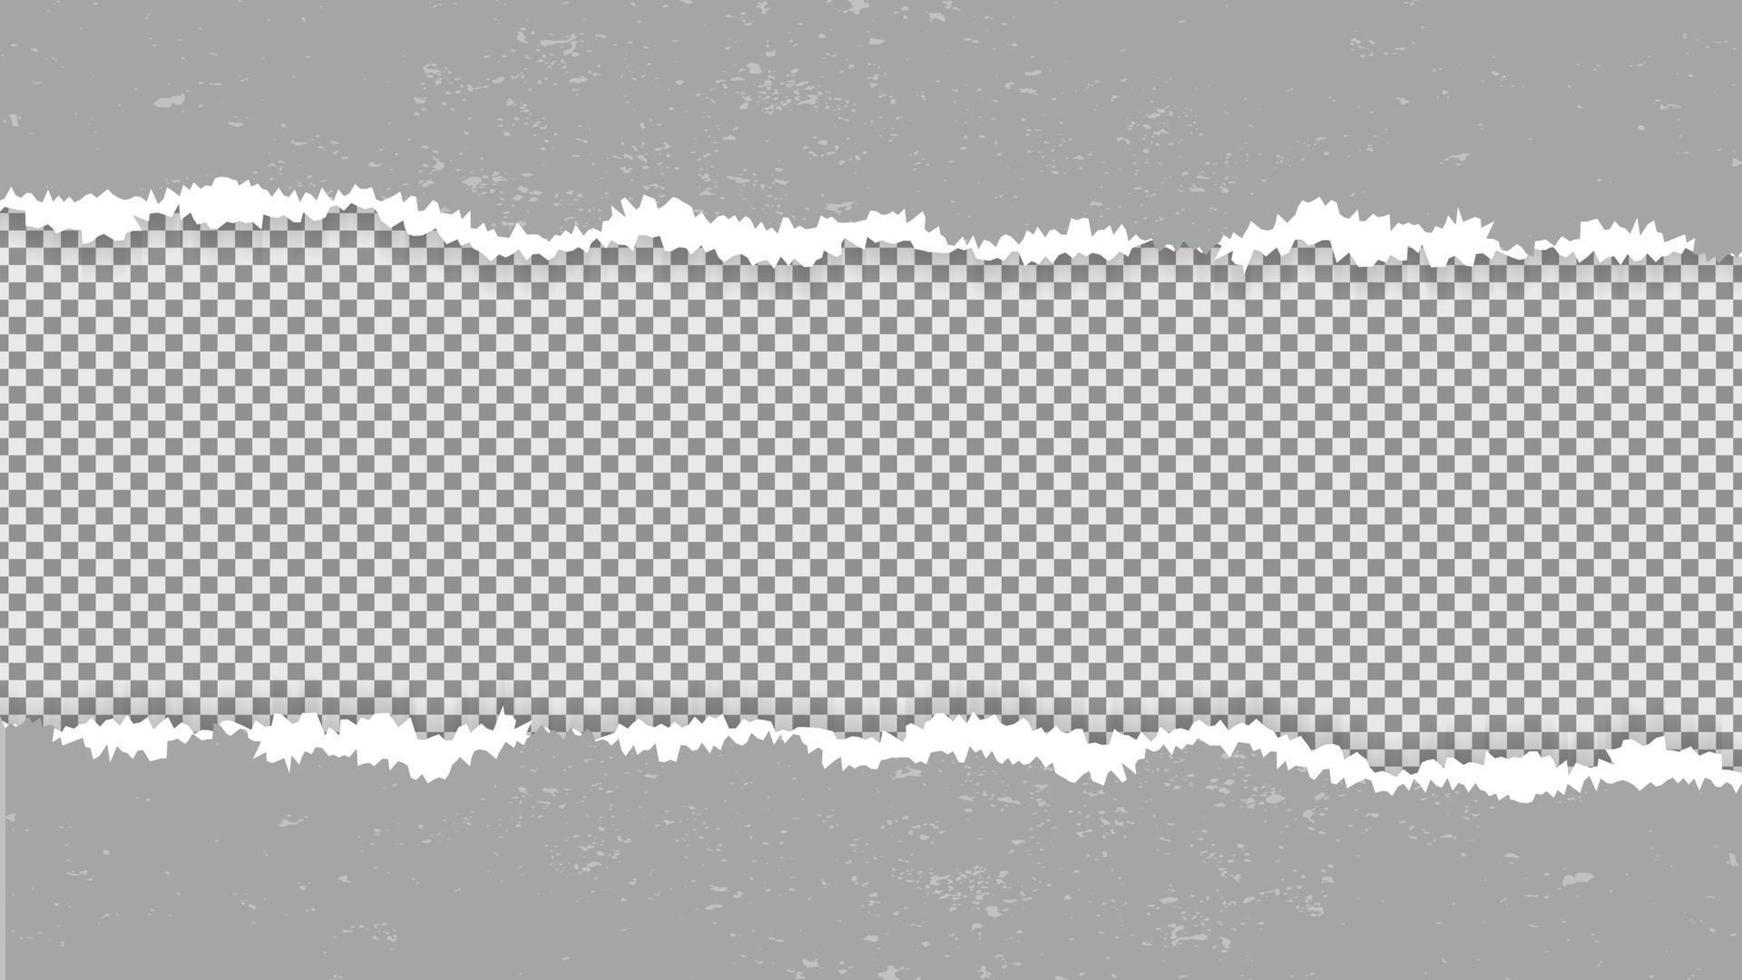 Isolated Gray Torn Paper Template for Banner, Poster, and Flyer. Editable Vector Illustration